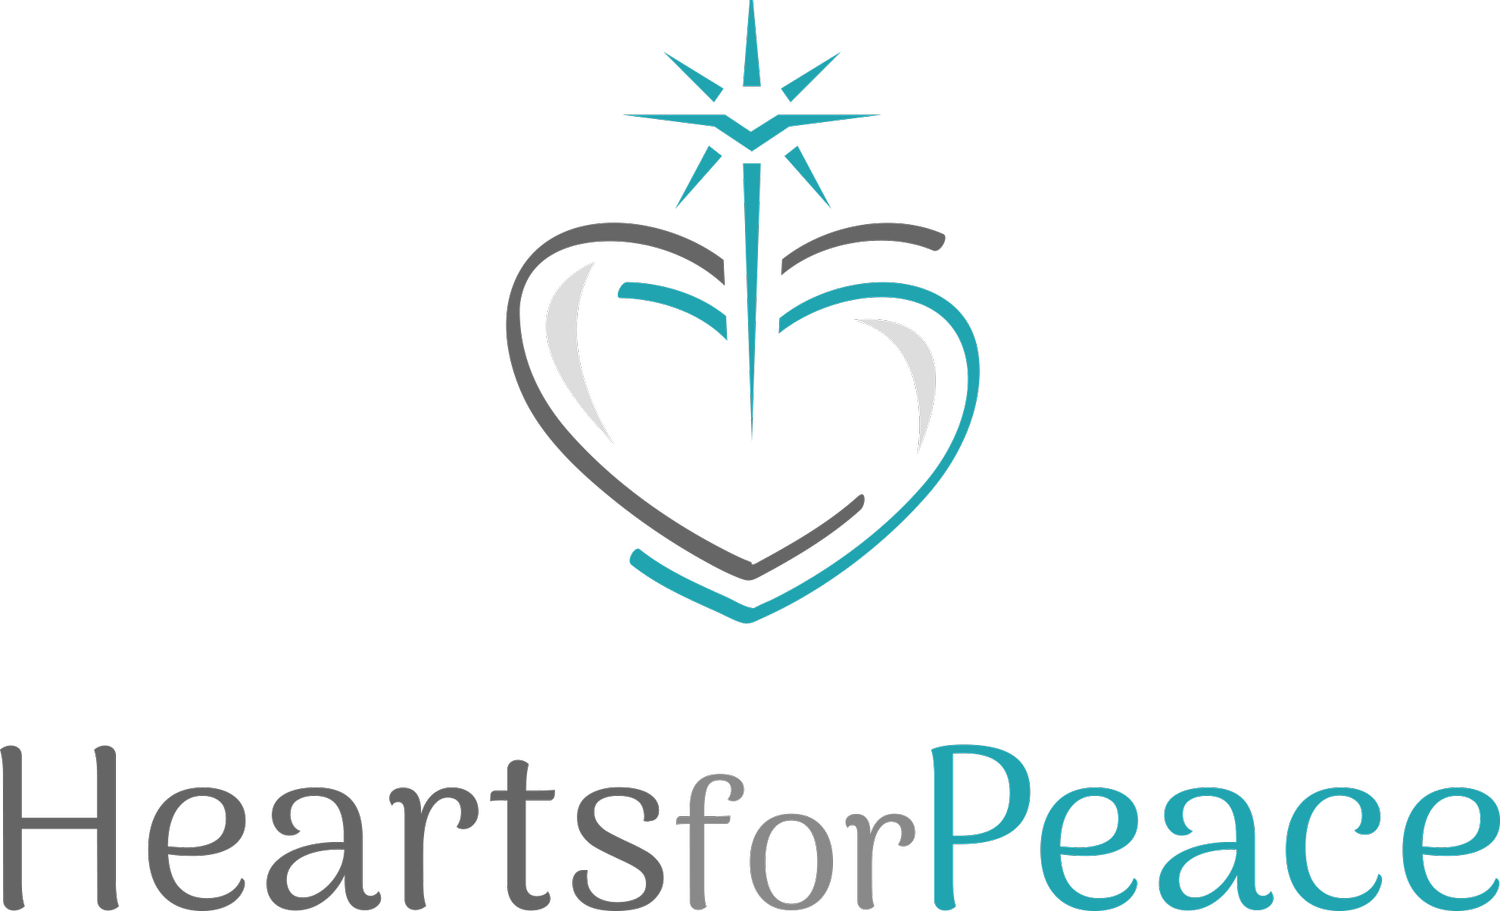 Hearts for Peace